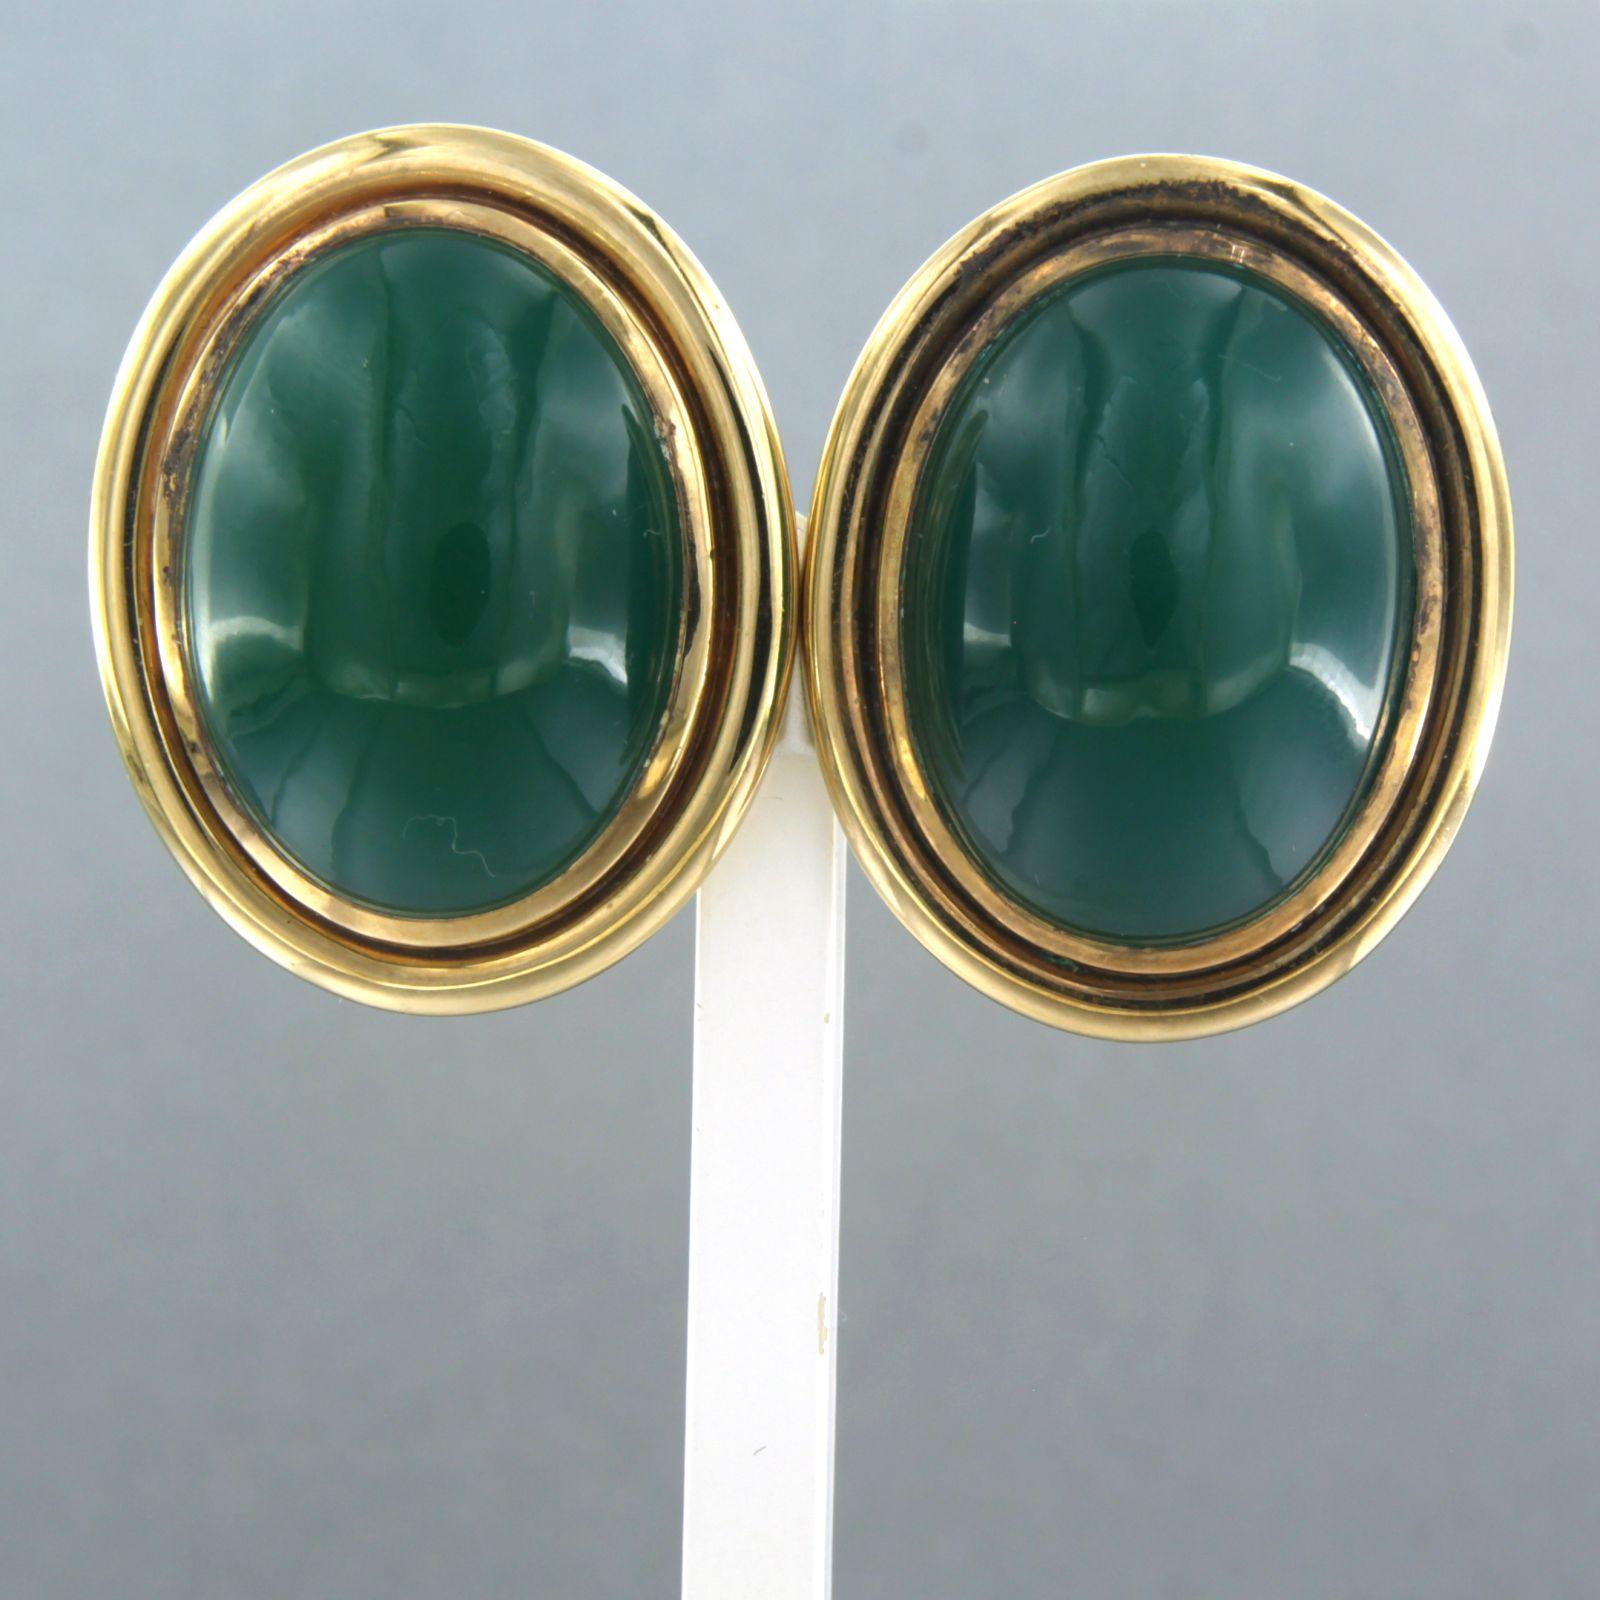 18k yellow gold ear clips set with chrysophrase

detailed description:

the top of the ear clip is 3.1 cm high and 2.5 cm wide

total weight 34.8 grams

Occupied with

- 2 x 2.4 cm x 1.7 cm oval cabochon cut chrysoprase
color green
purity